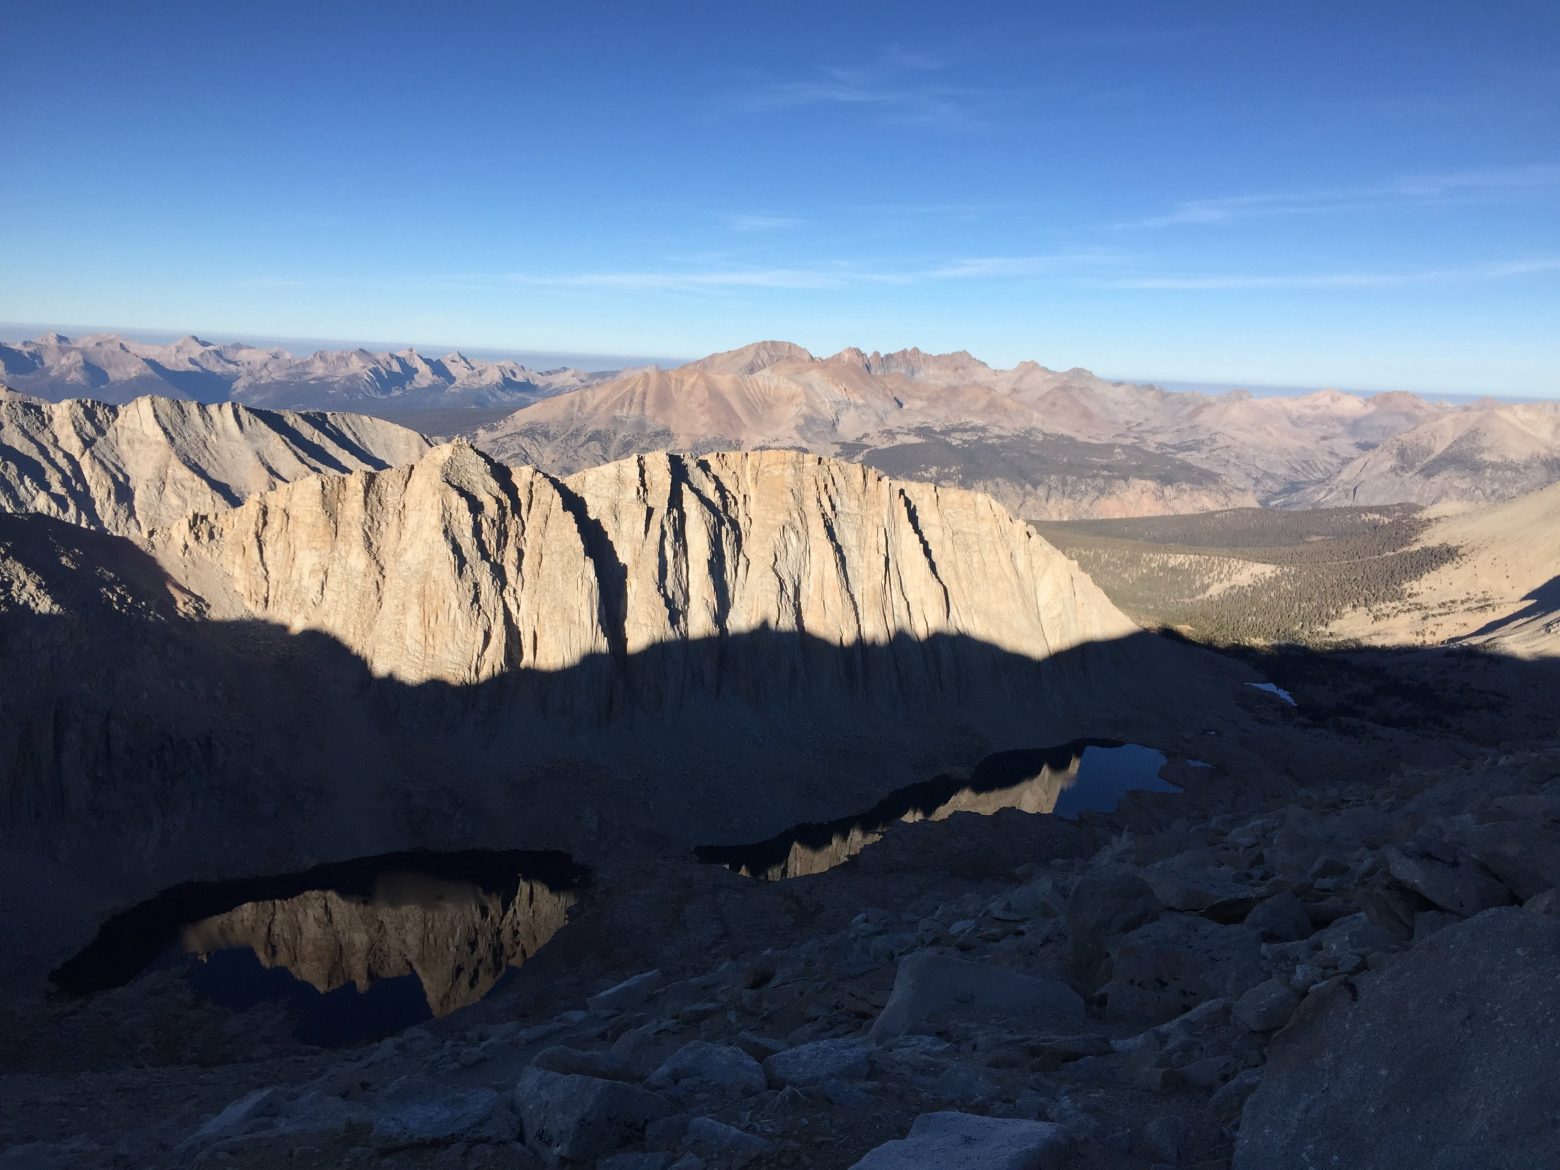 climbing down from the summit of mt whitney 9